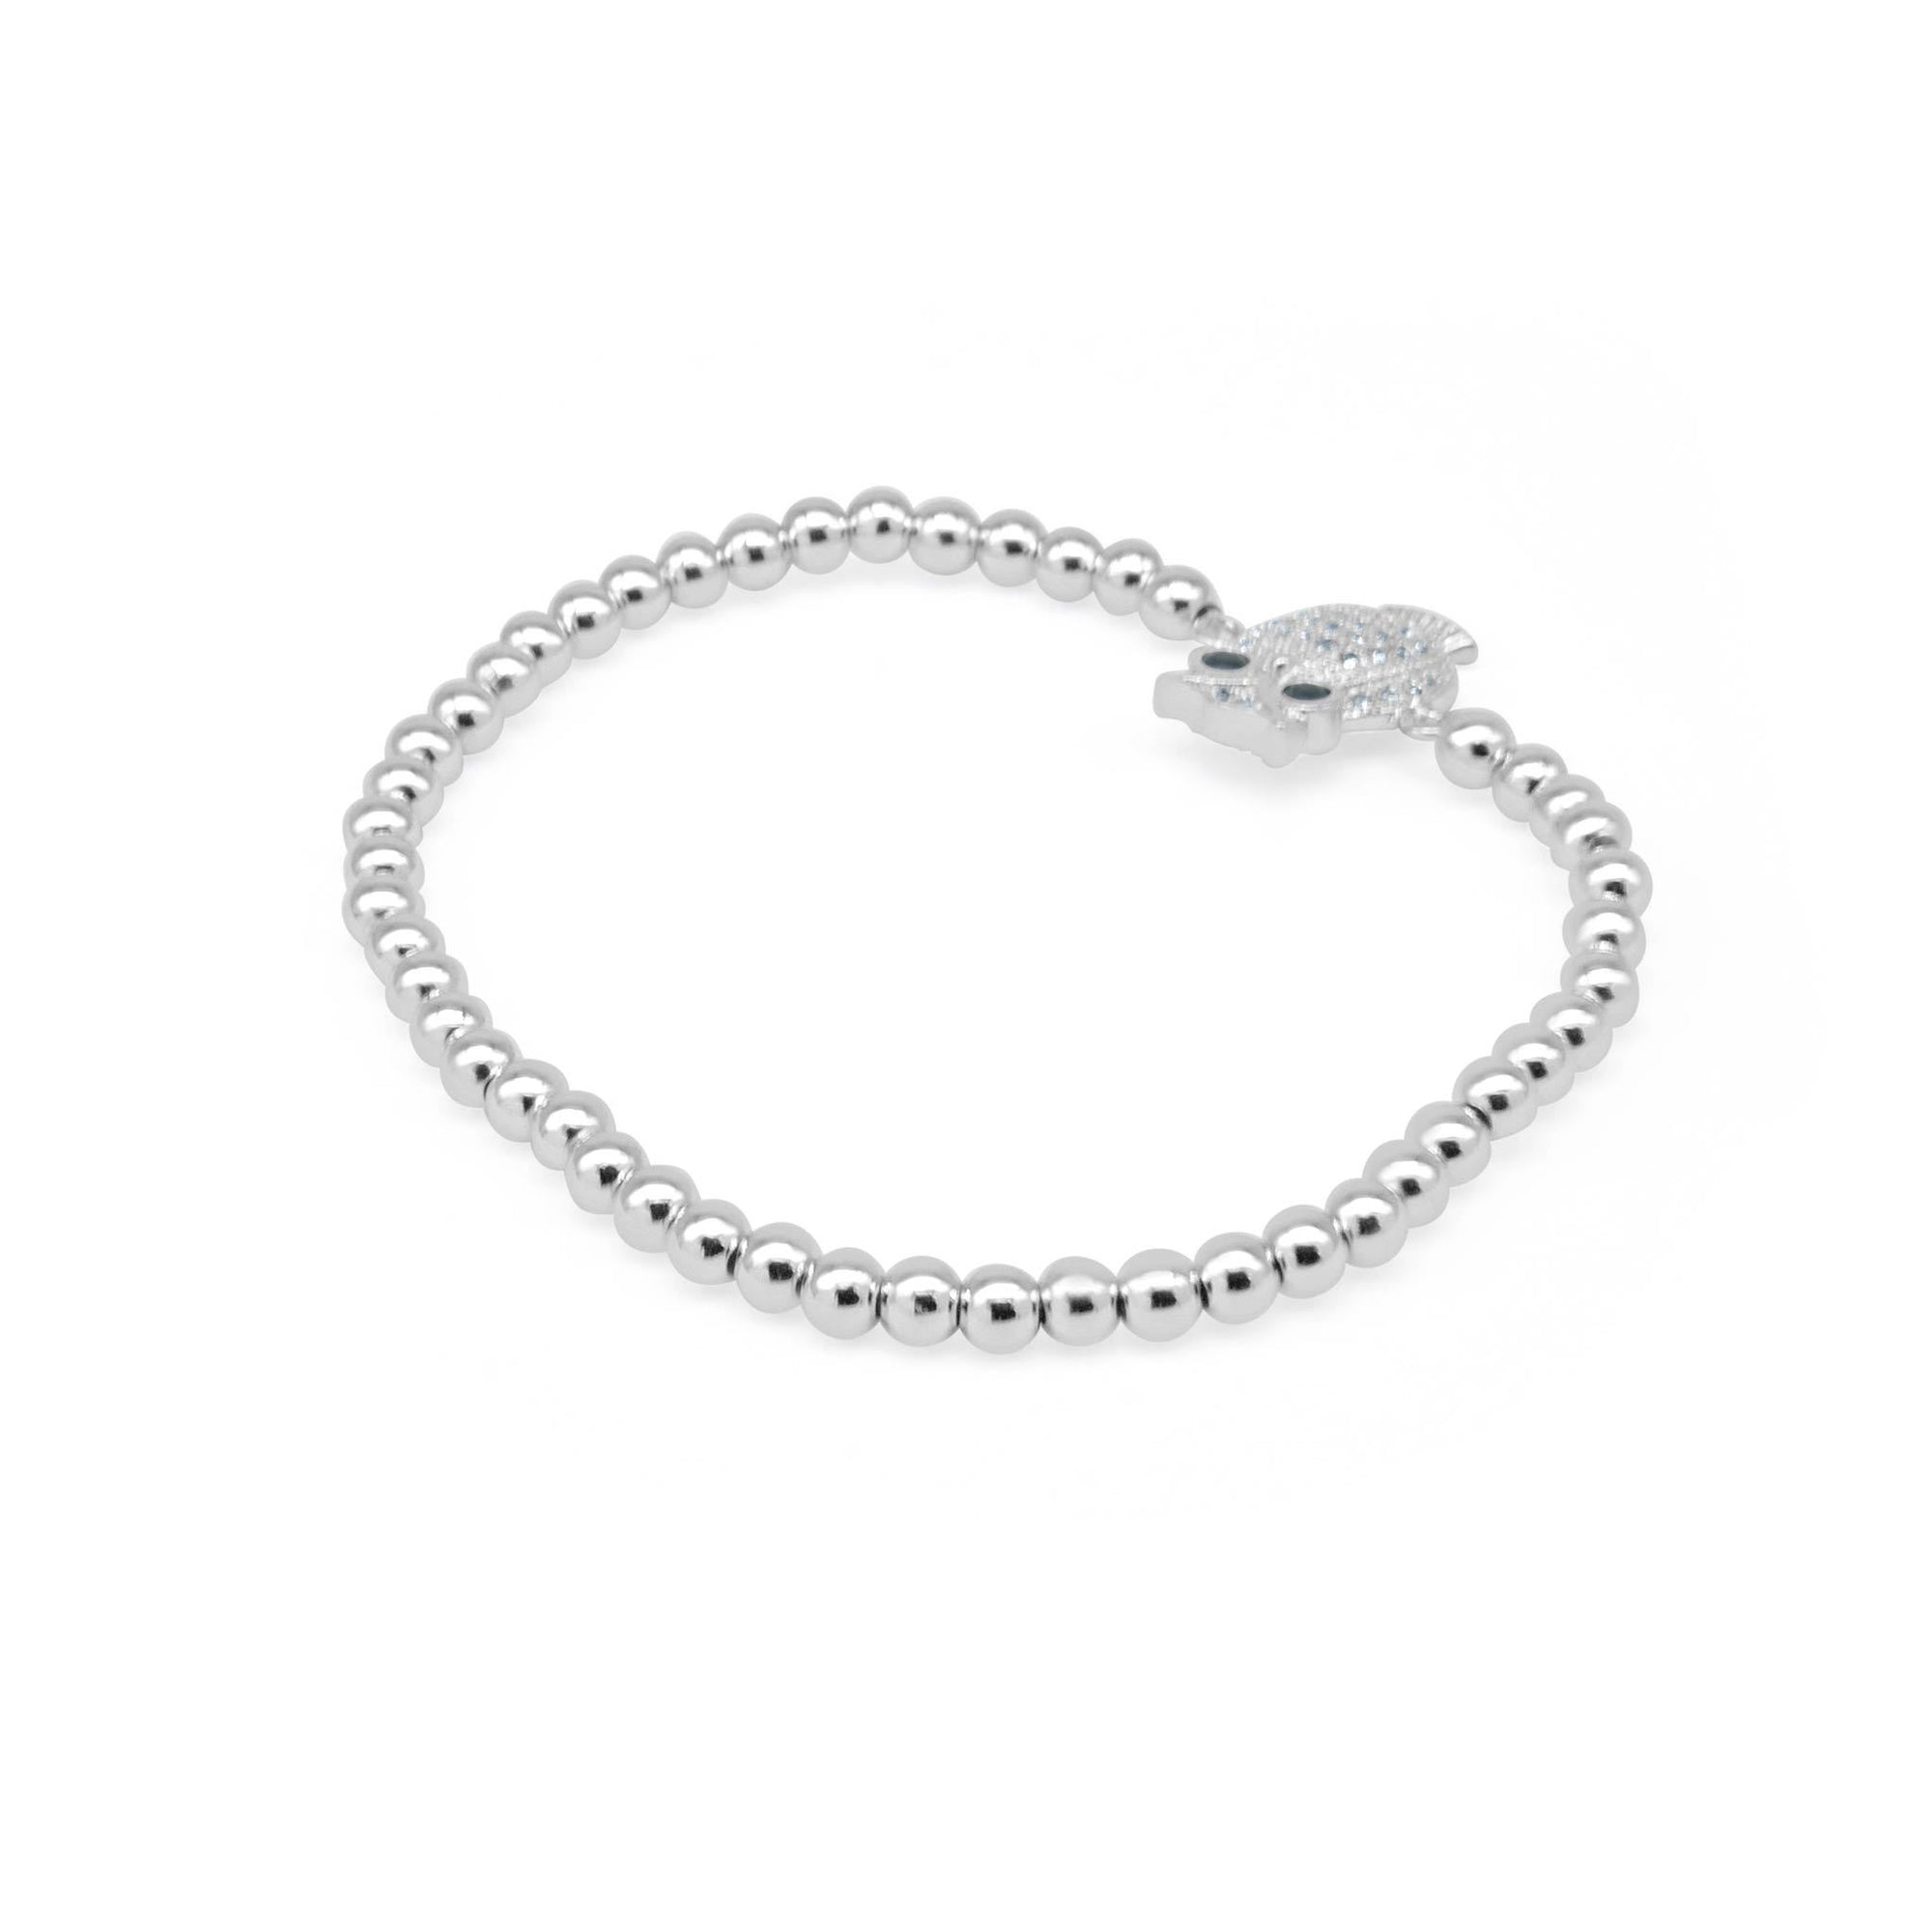 Silver beaded charm bracelet | Shop from over 50 styles of charm ...